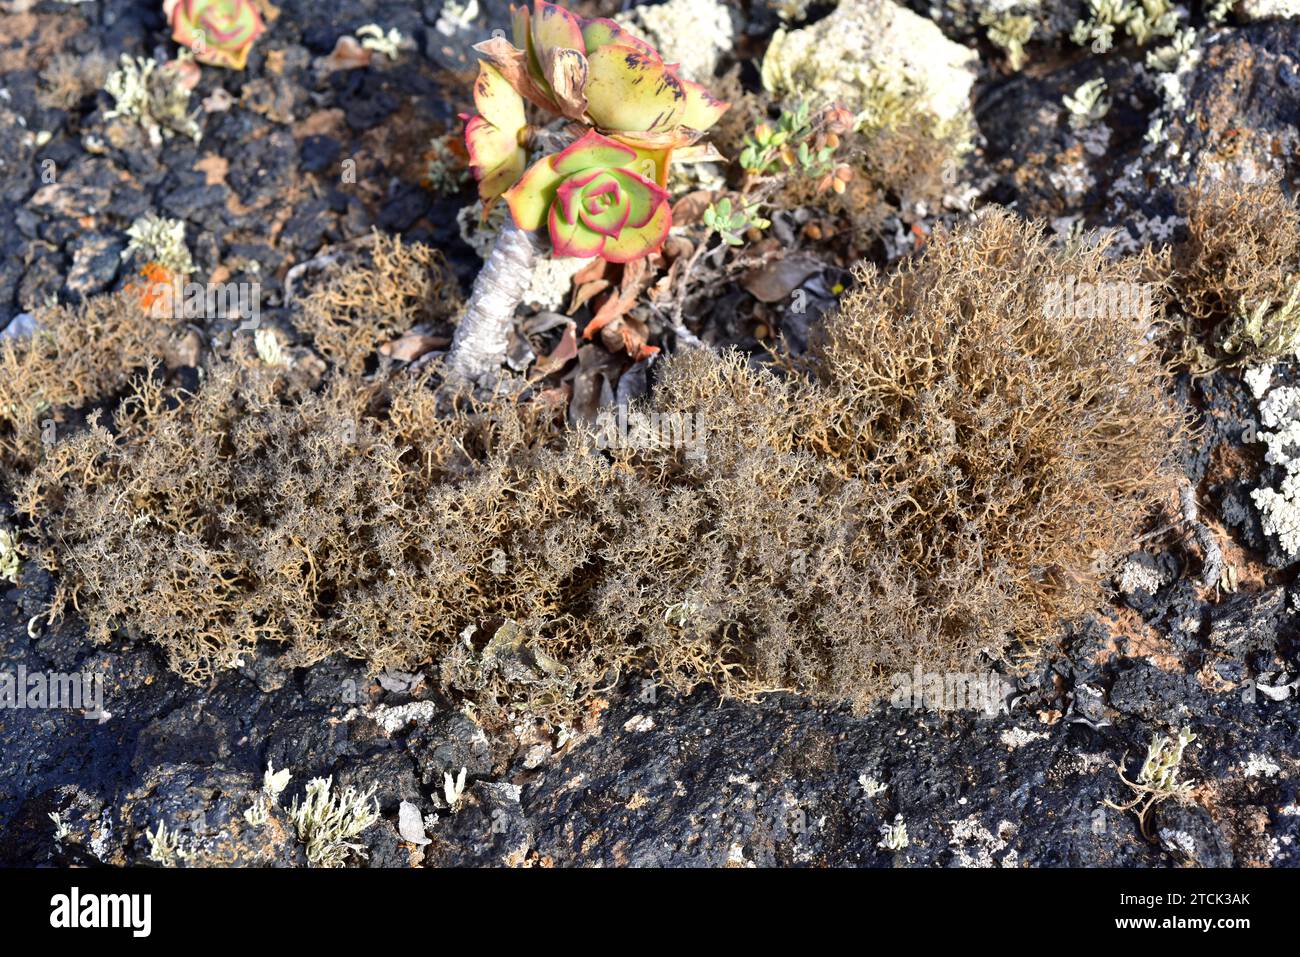 Cladonia subrangiformis is a fruticulose lichen growing on a volcanic rock close to Aeonium, a crassulaceae plant. This photo was taken in Lanzarote I Stock Photo